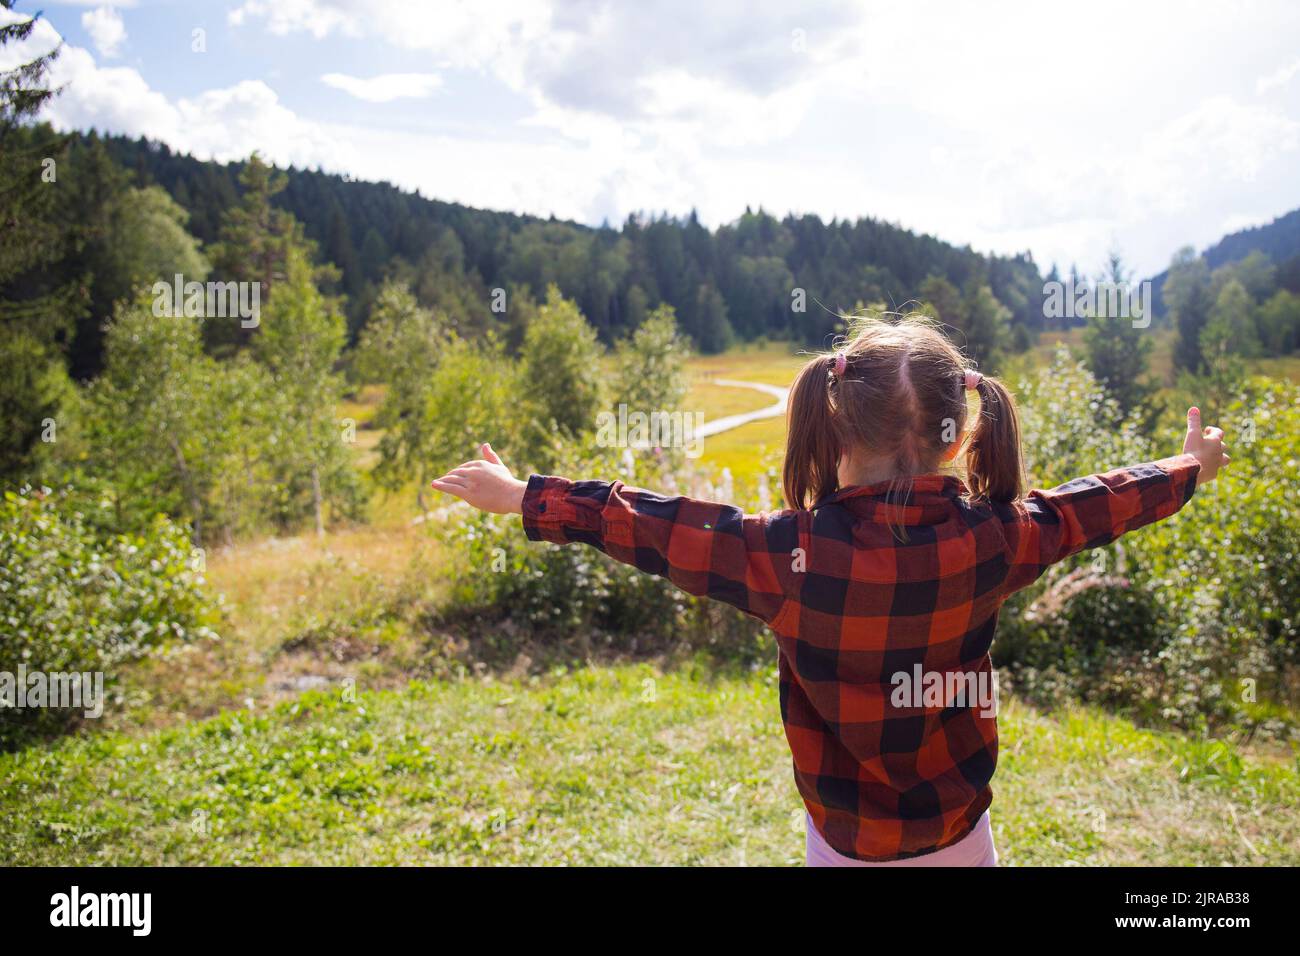 Caucasian child girl, back view, with open arms in a natural mountain landscape on a sunny day. Pian di Gembro natural park, Valtellina, Italy. Stock Photo